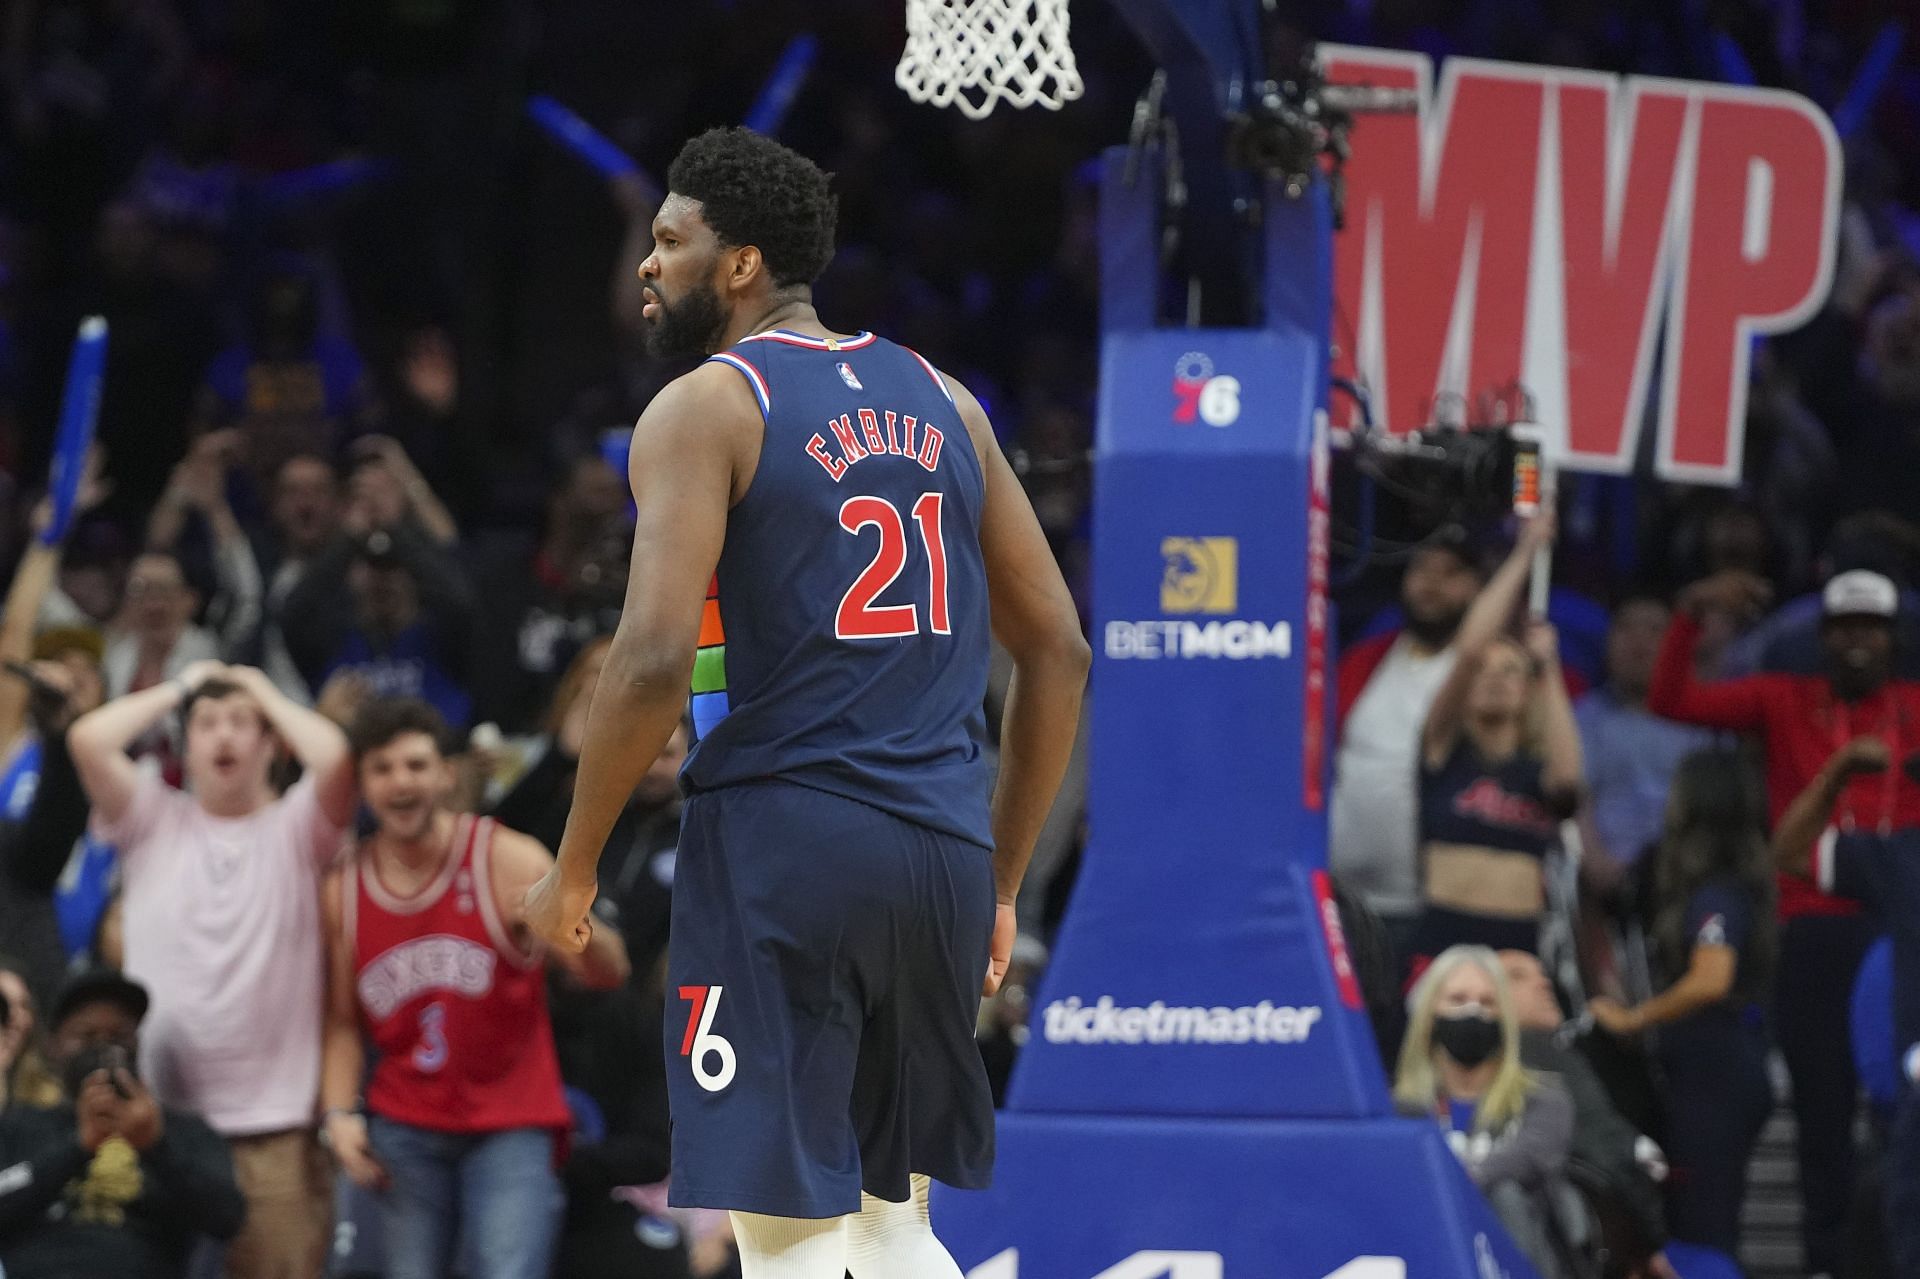 Joel Embiid of the Philadelphia 76ers reacts against the Chicago Bulls on Monday in Philadelphia, Pennsylvania. The 76ers defeated the Bulls 121-106.